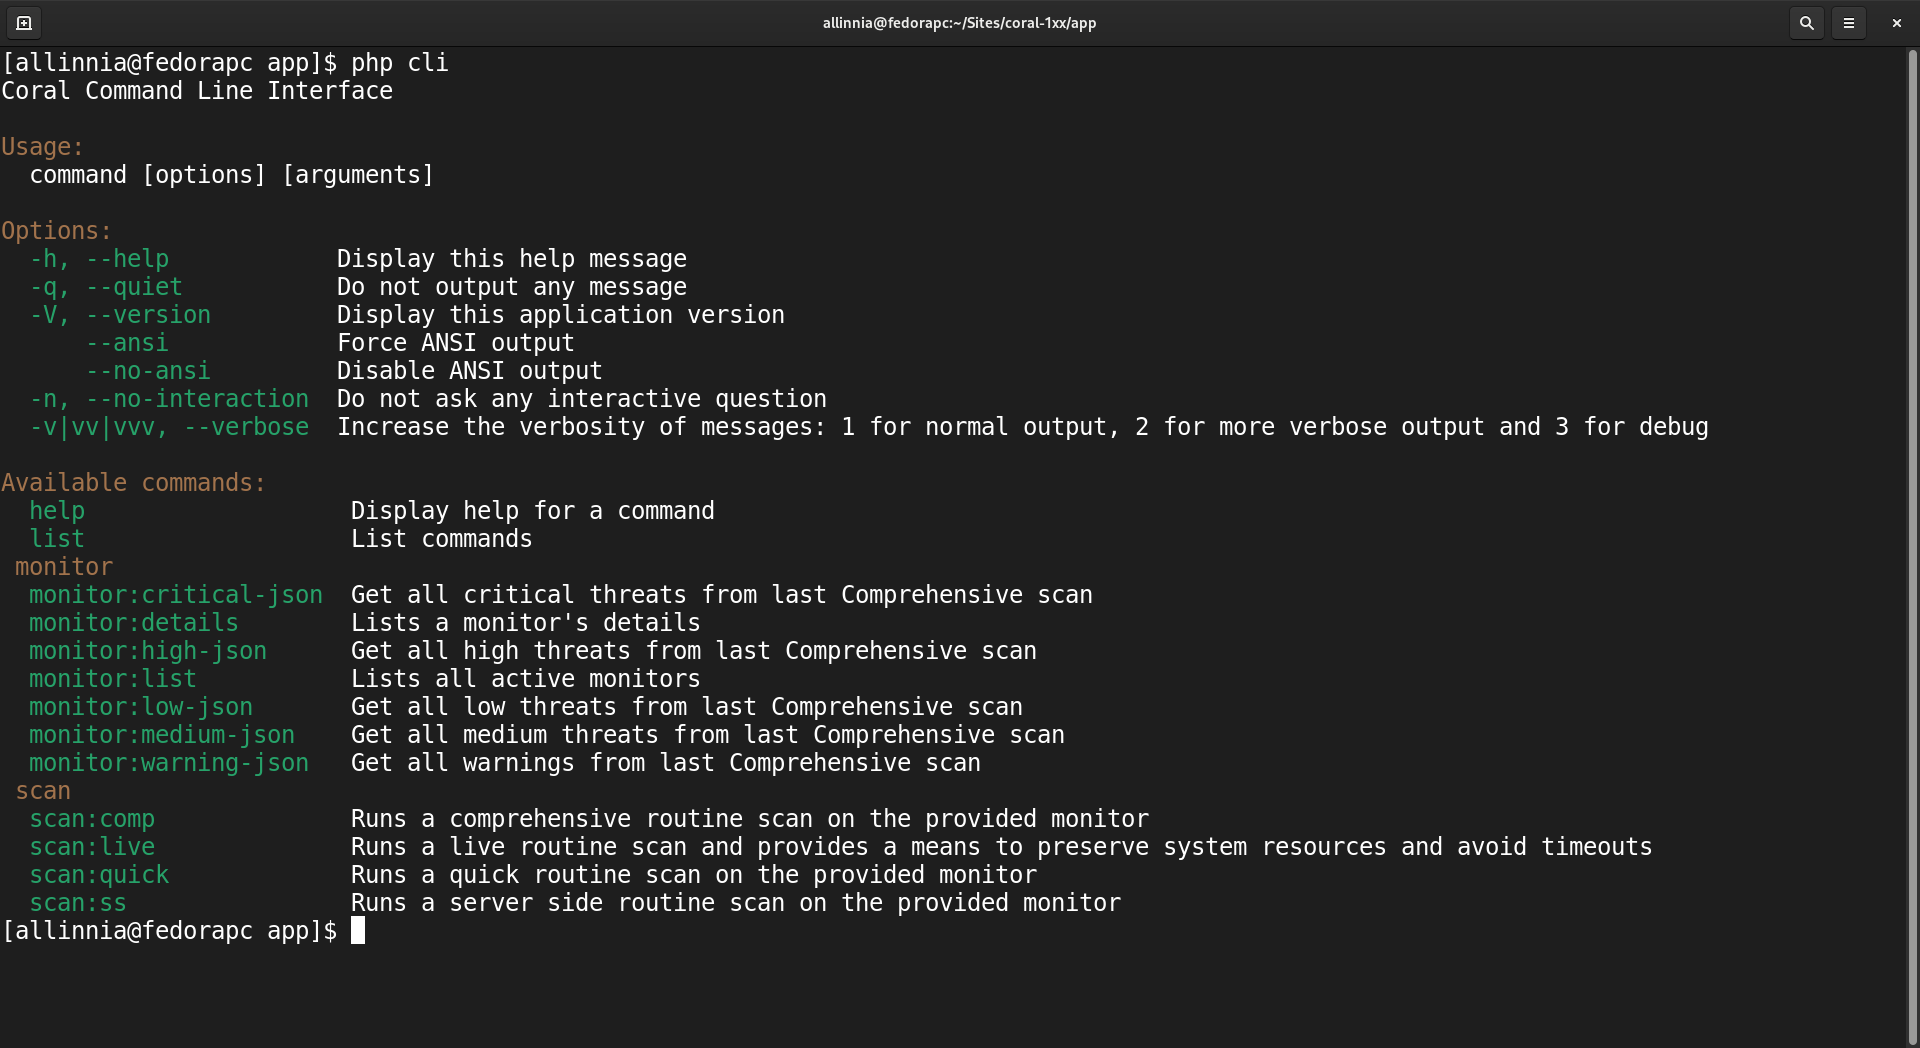 Command line interface